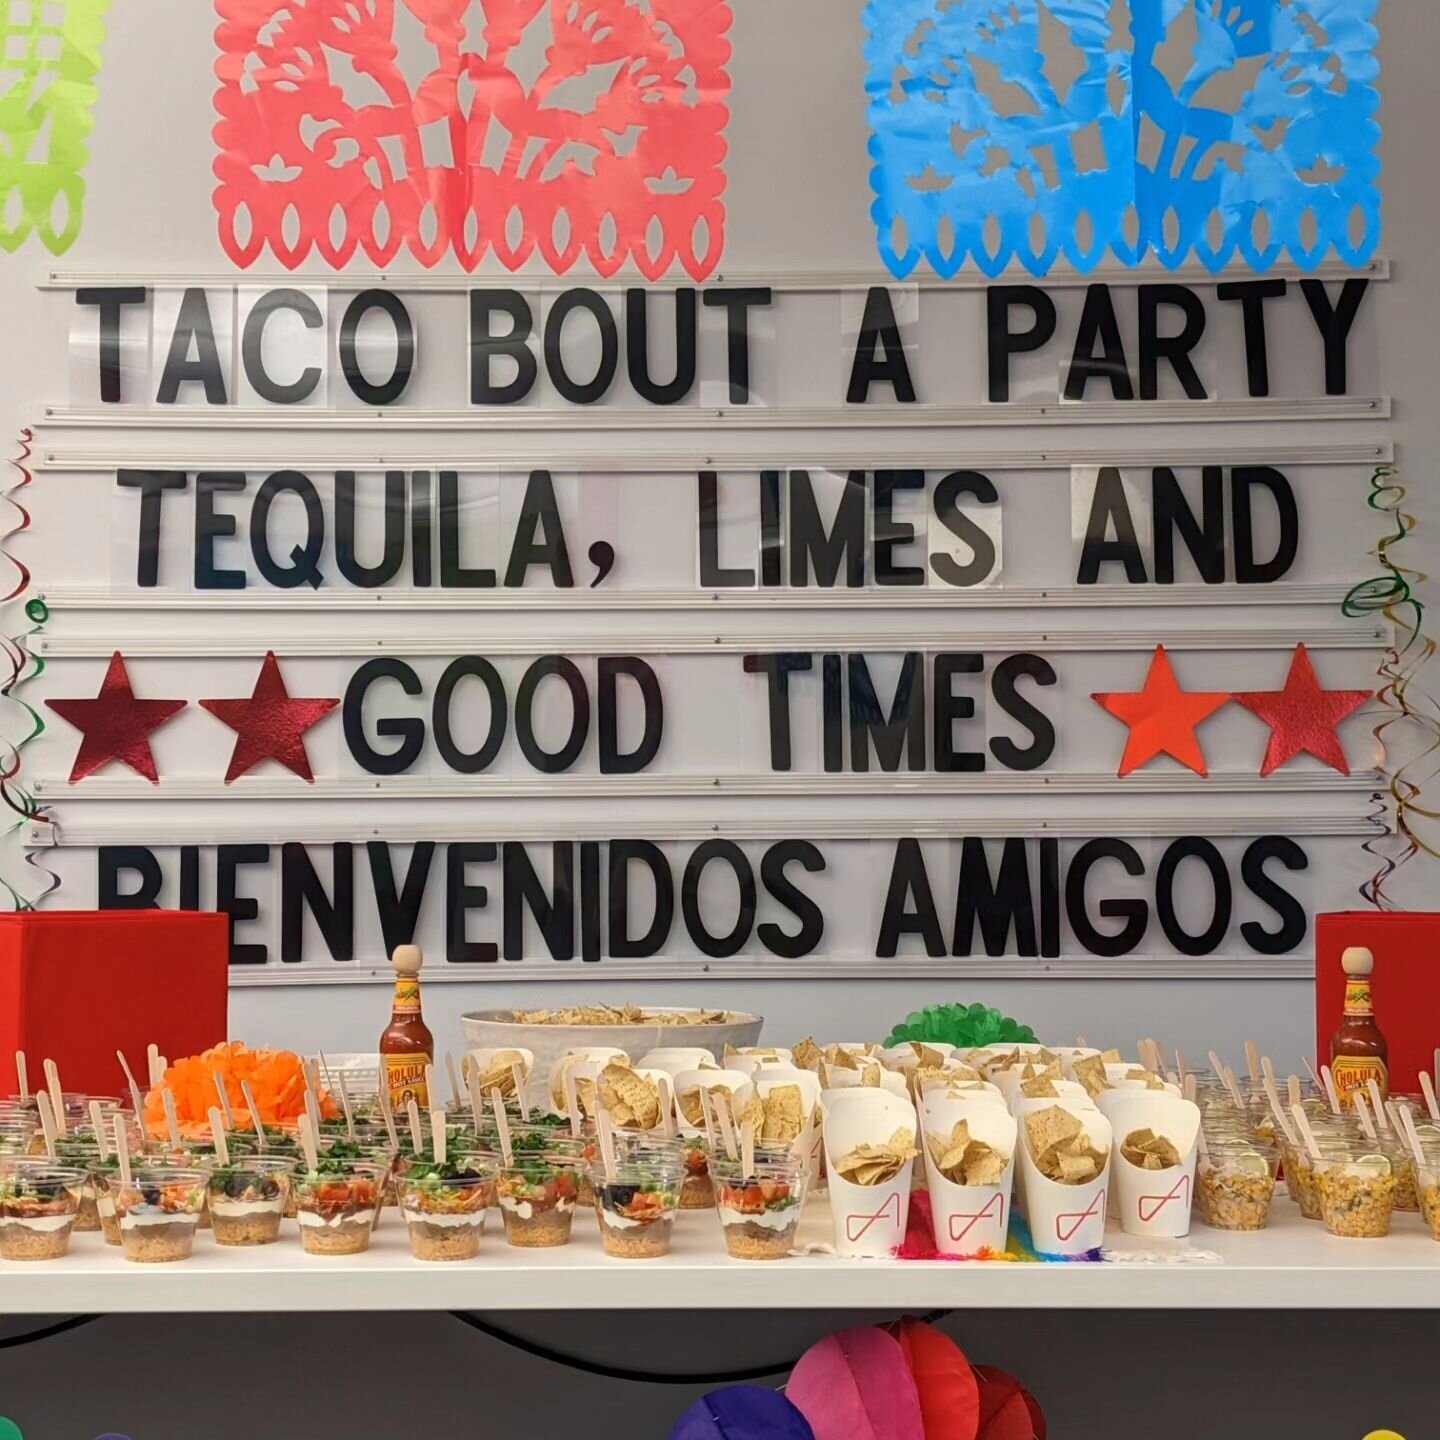 Happy Cinco de Mayo 🎉

A big thank you to our friends @theagencyhealdsburg for kicking off the celebrations!